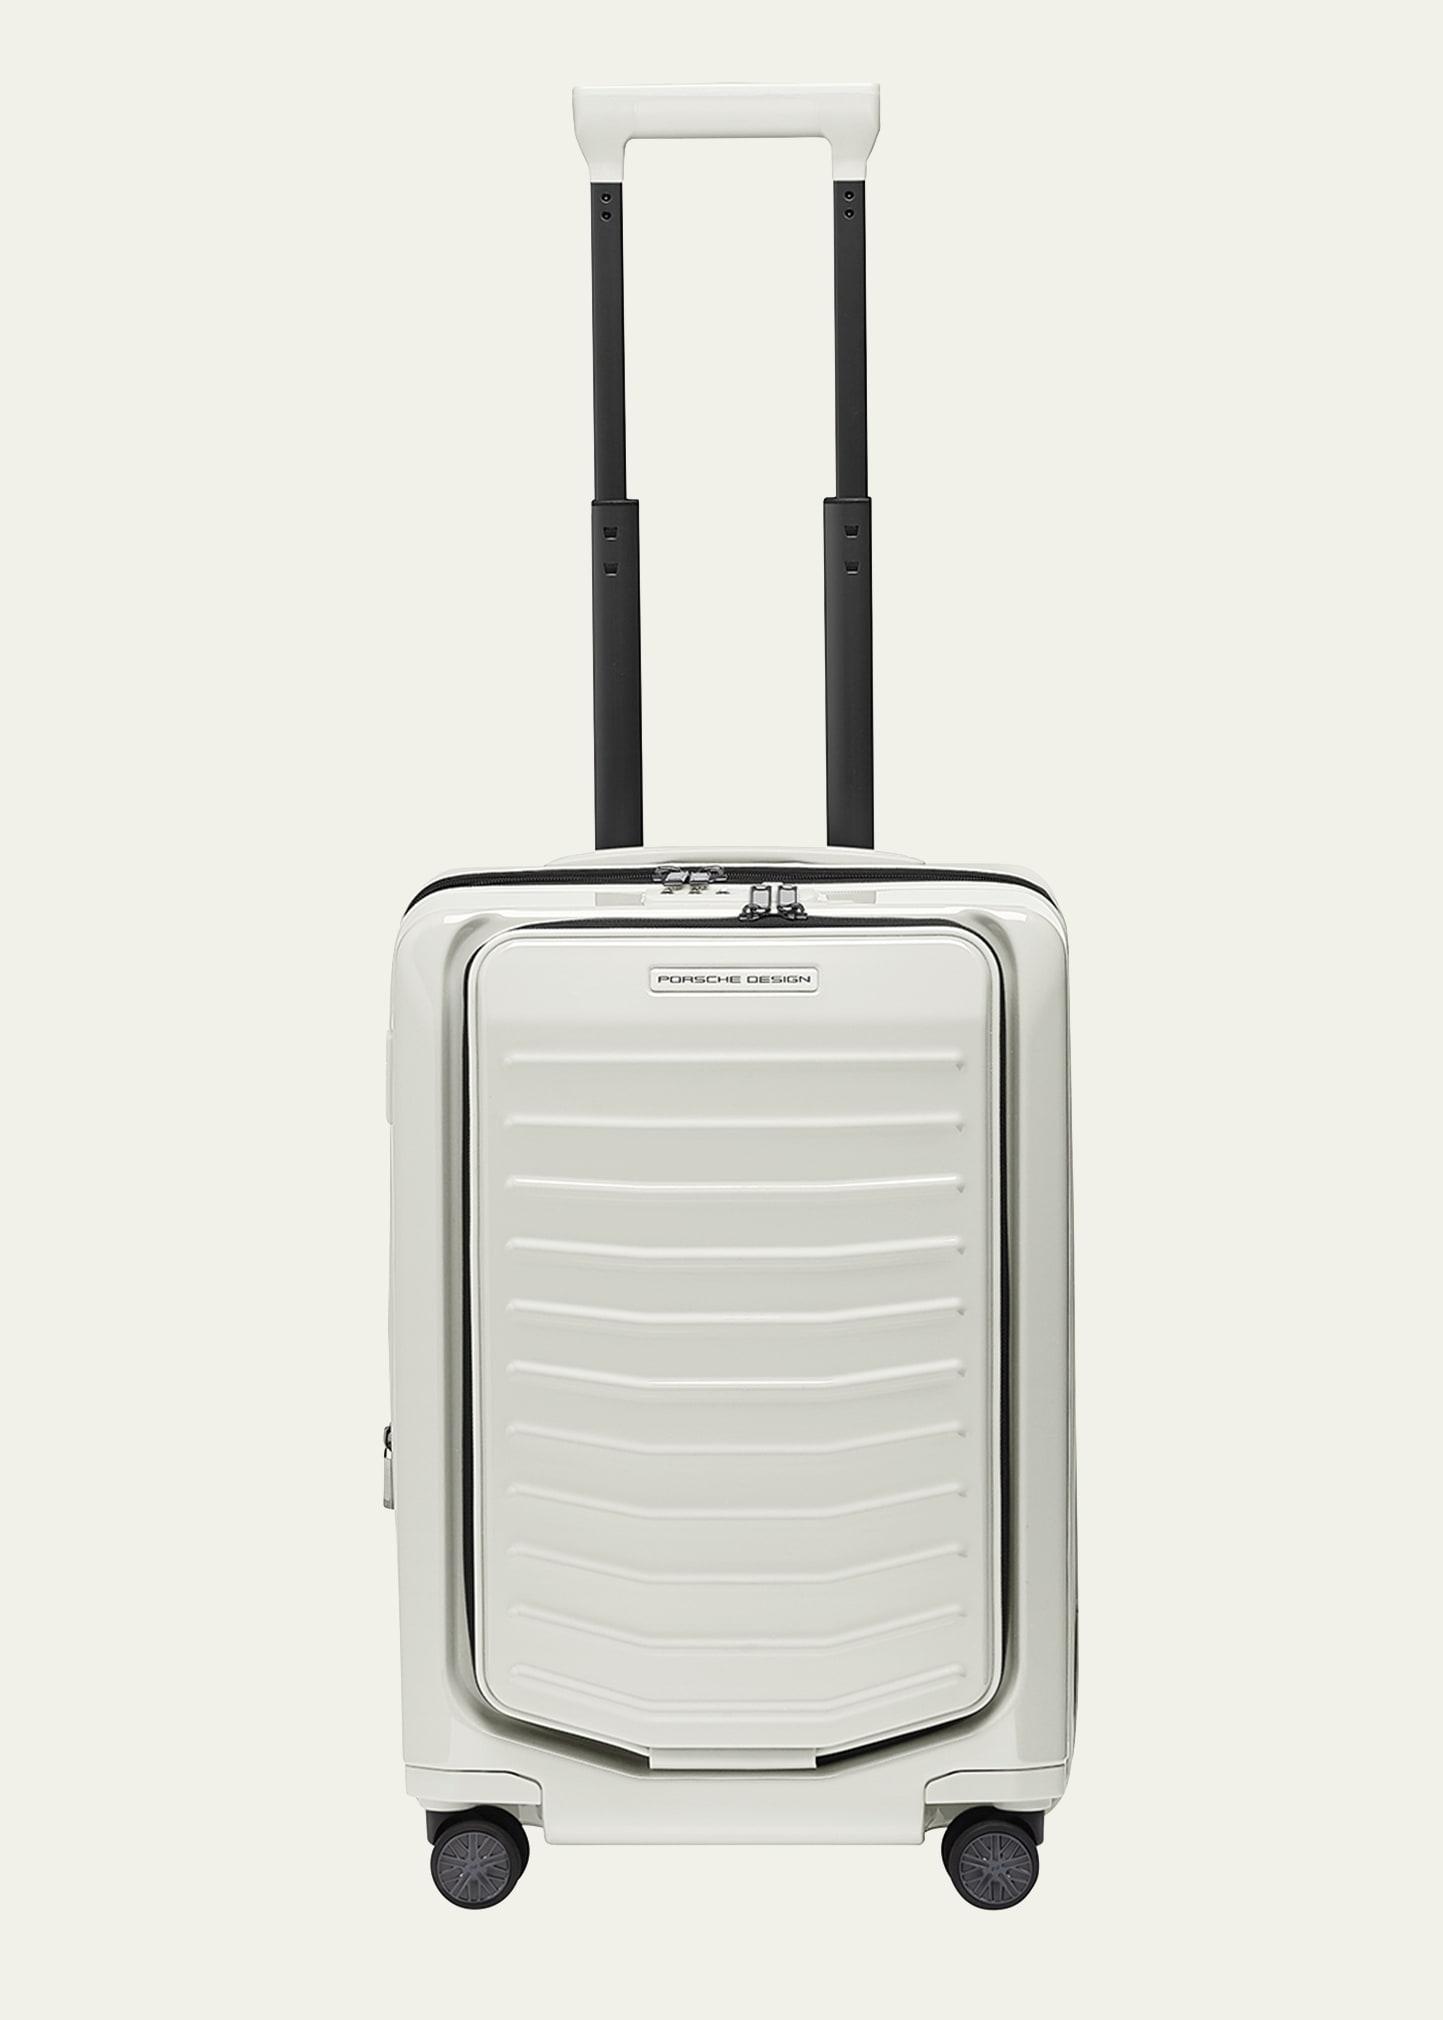 Roadster 21" Carry-On Expandable Spinner Luggage